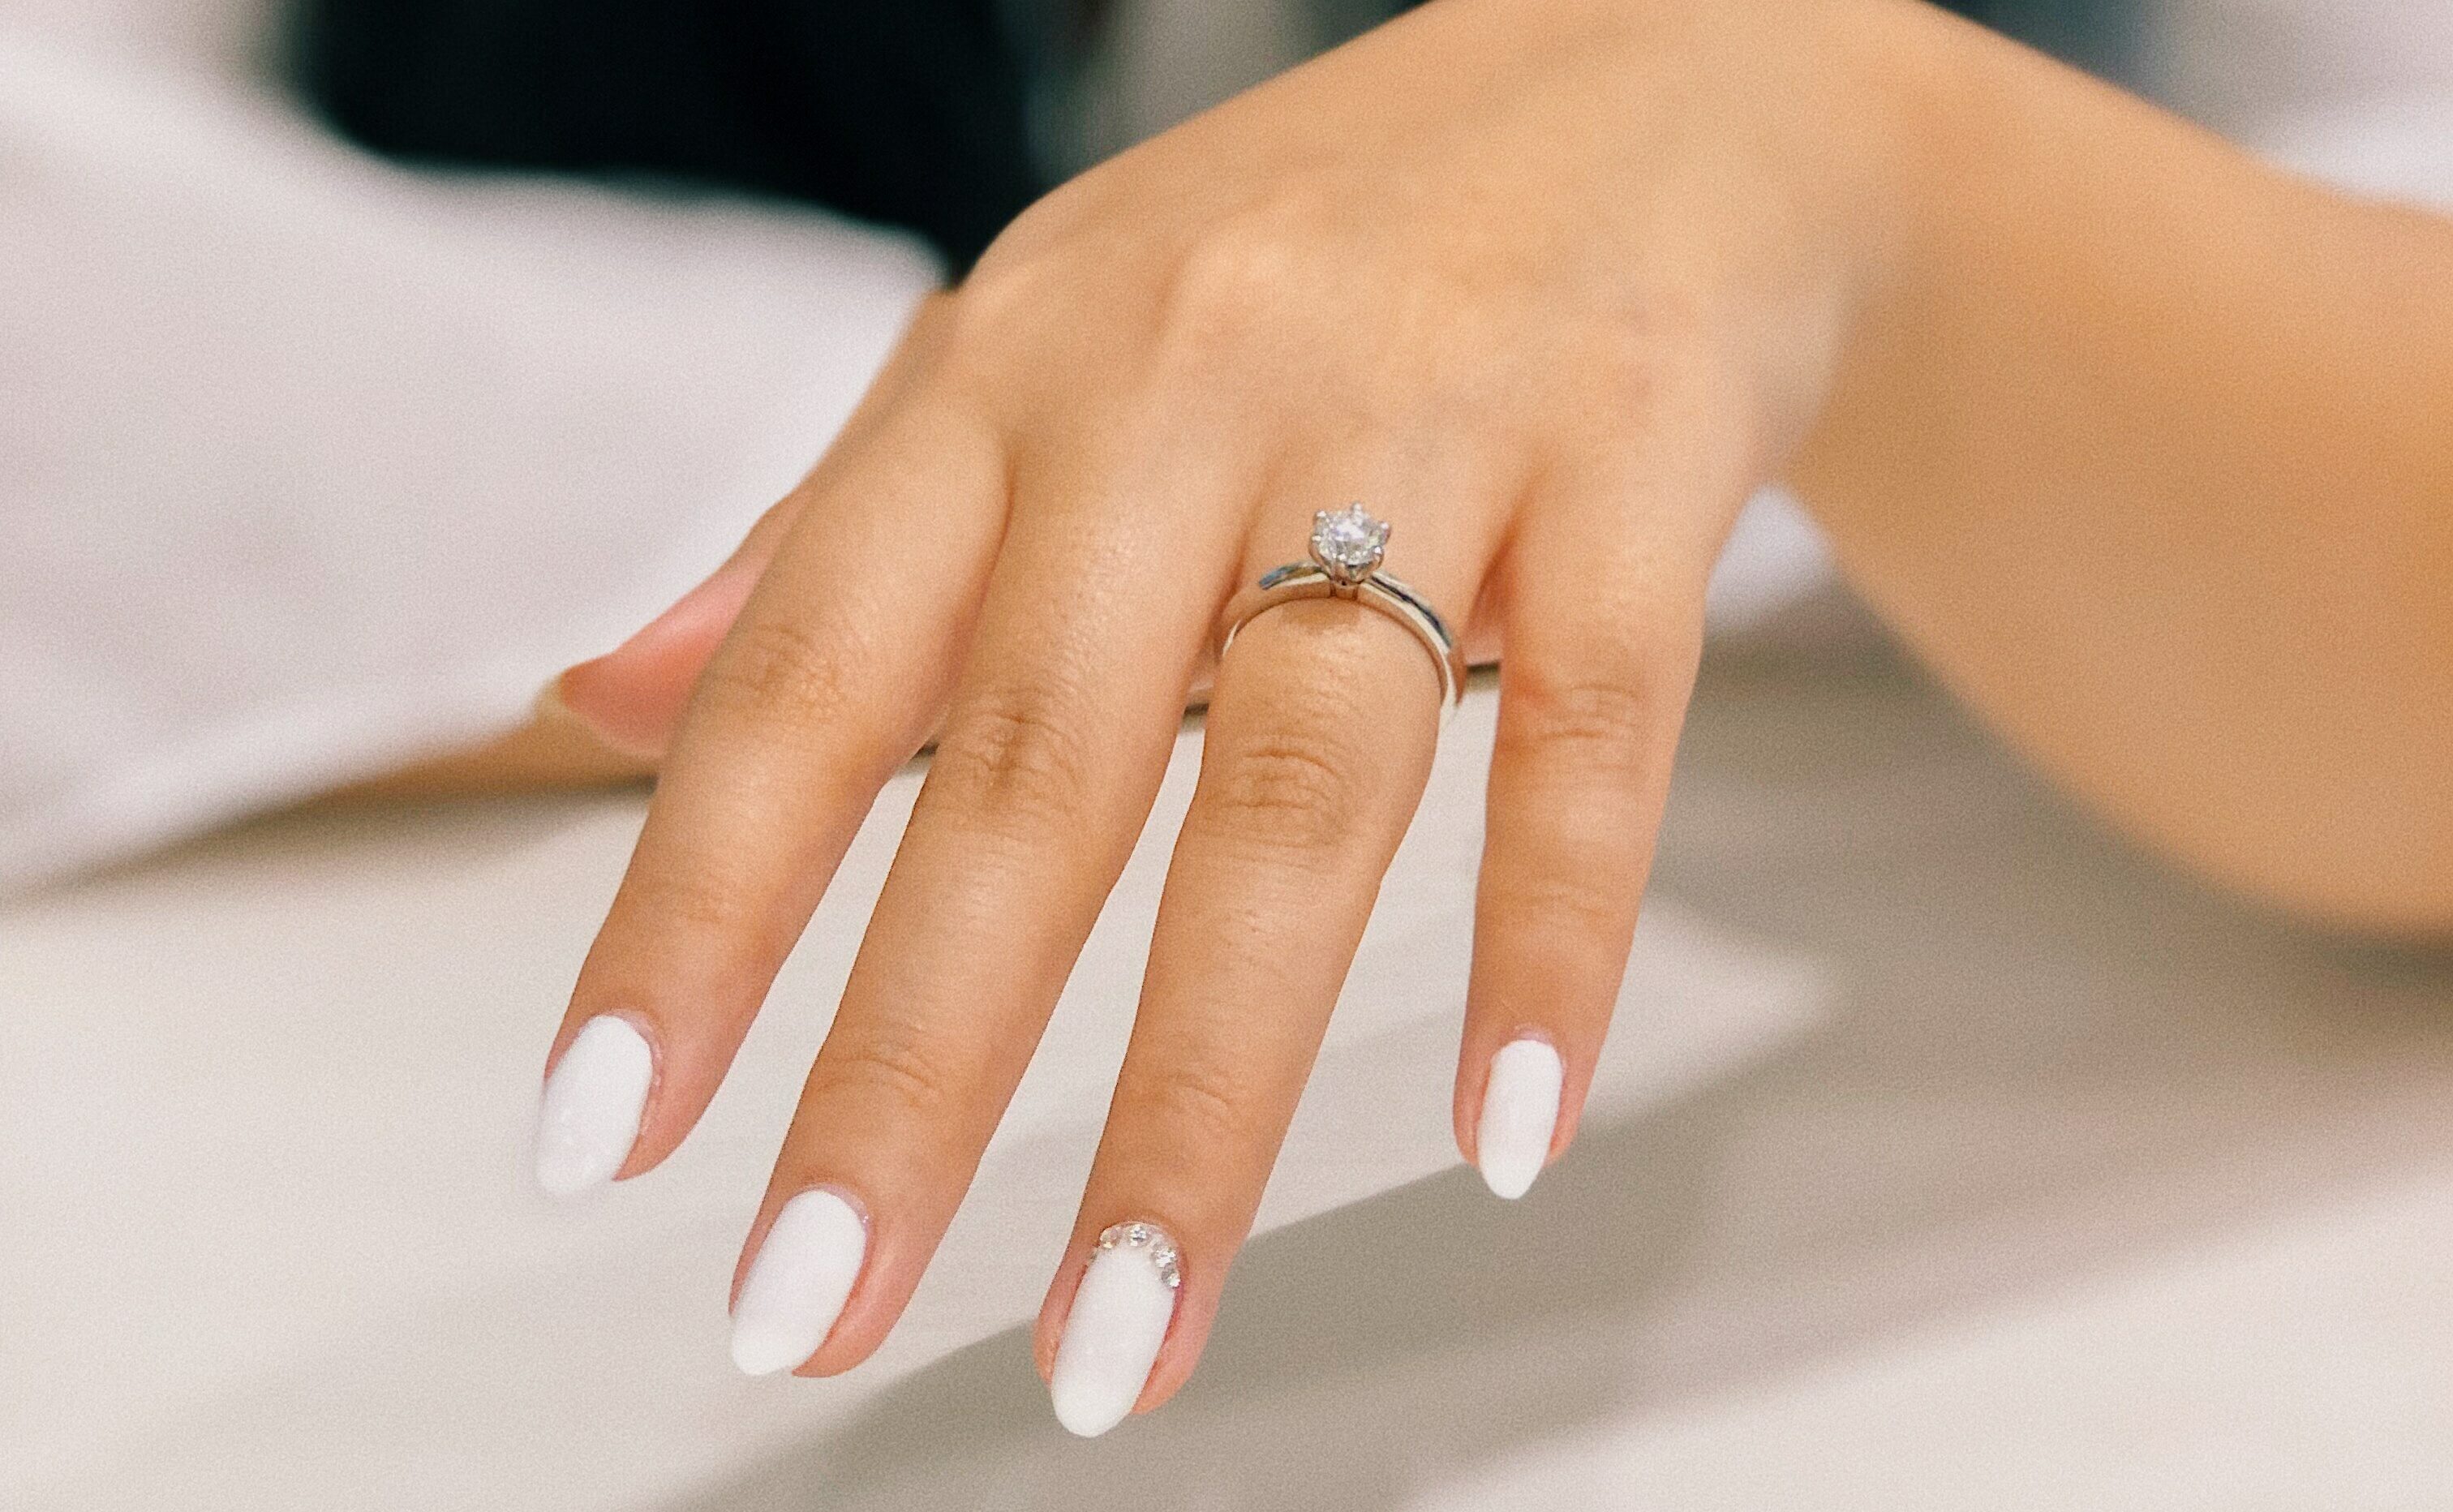 Smooth hand with fresh manicure and engagement ring